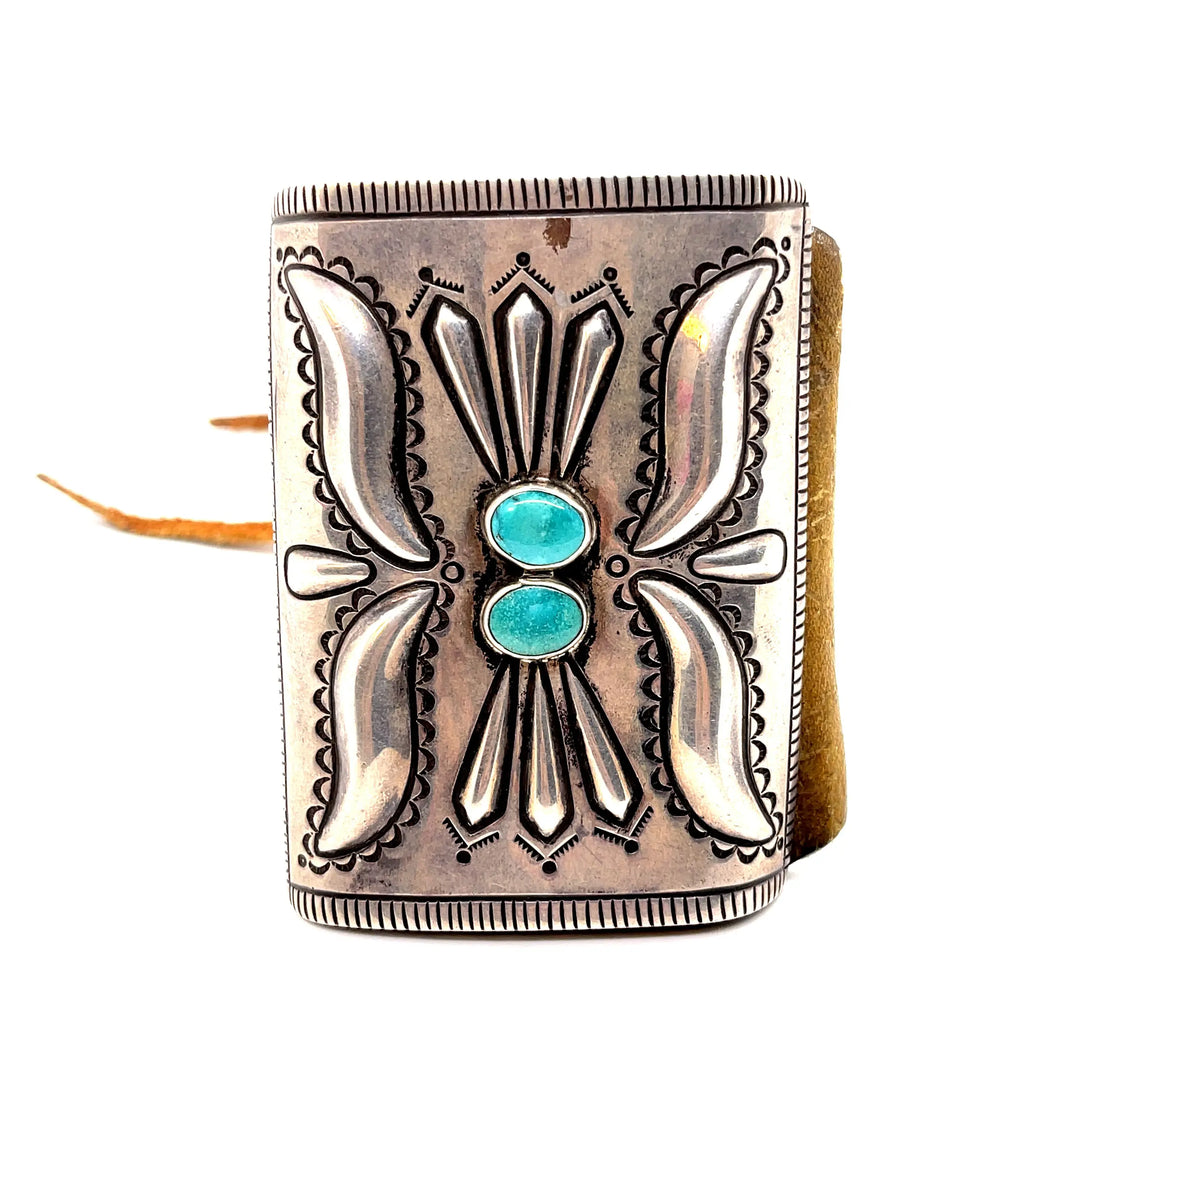 Vintage One of a Kind Sterling Silver and Turquoise Bowguard on Leather  Signed and dated around the 1900s  NOTE: Please bear that in mind that, when you purchase vintage, it might not be perfect, but it will be authentic. Please contact shop@sbvail.com if you have additional questions about the nature and condition of the product.